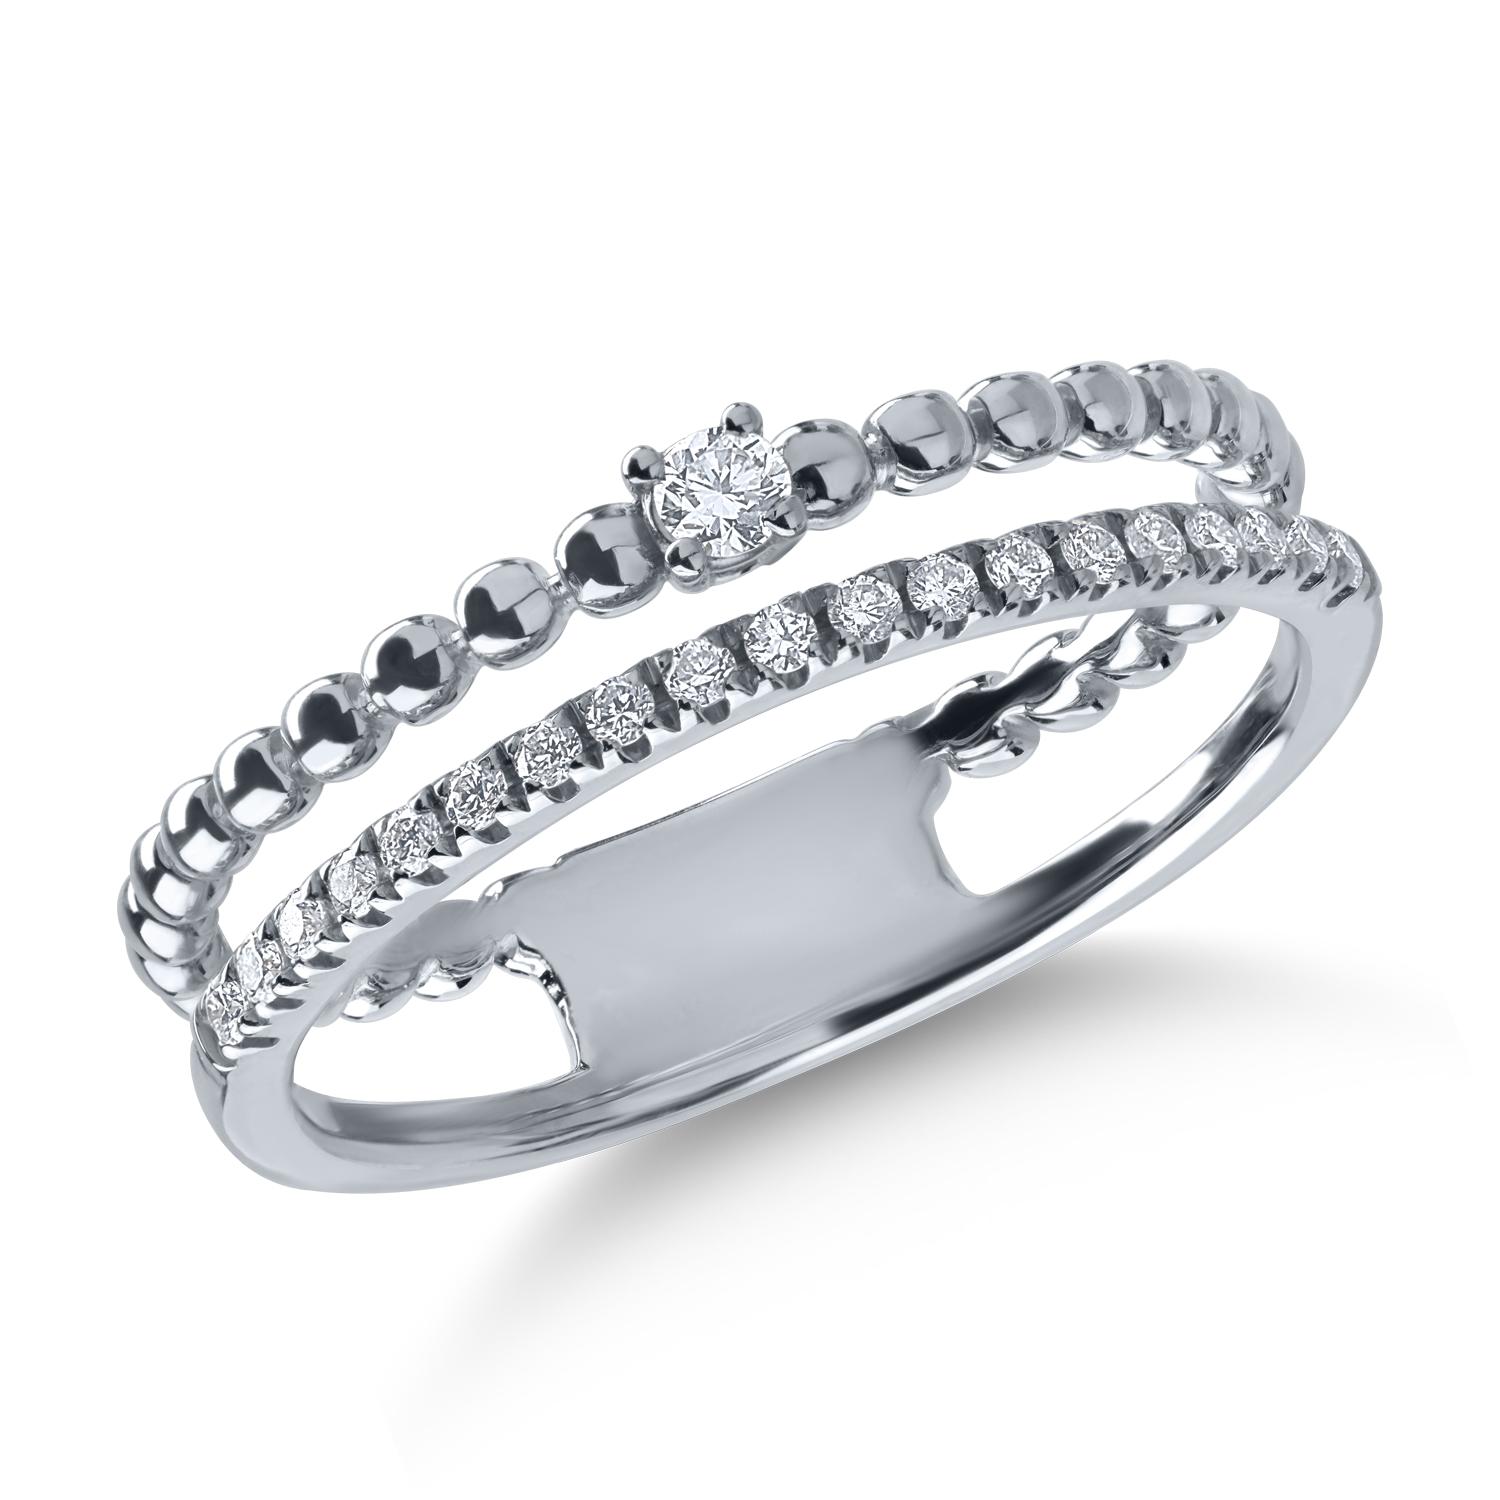 White gold ring with 0.15ct diamonds